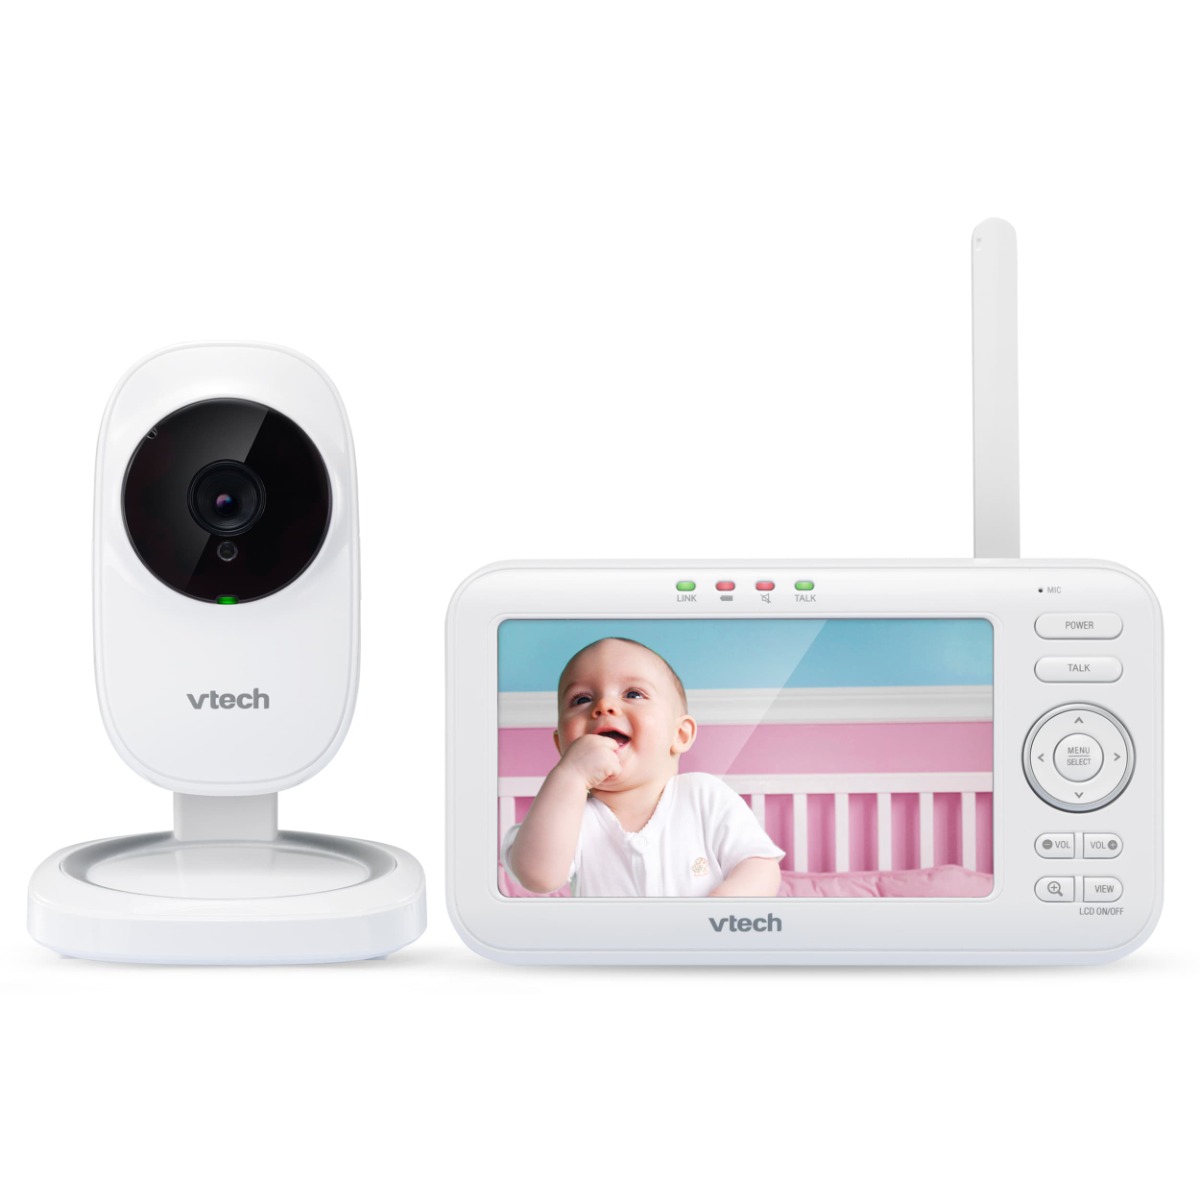 Vtech VM5251 5" Digital Video Baby Monitor with Full-Color and Automatic Night Vision